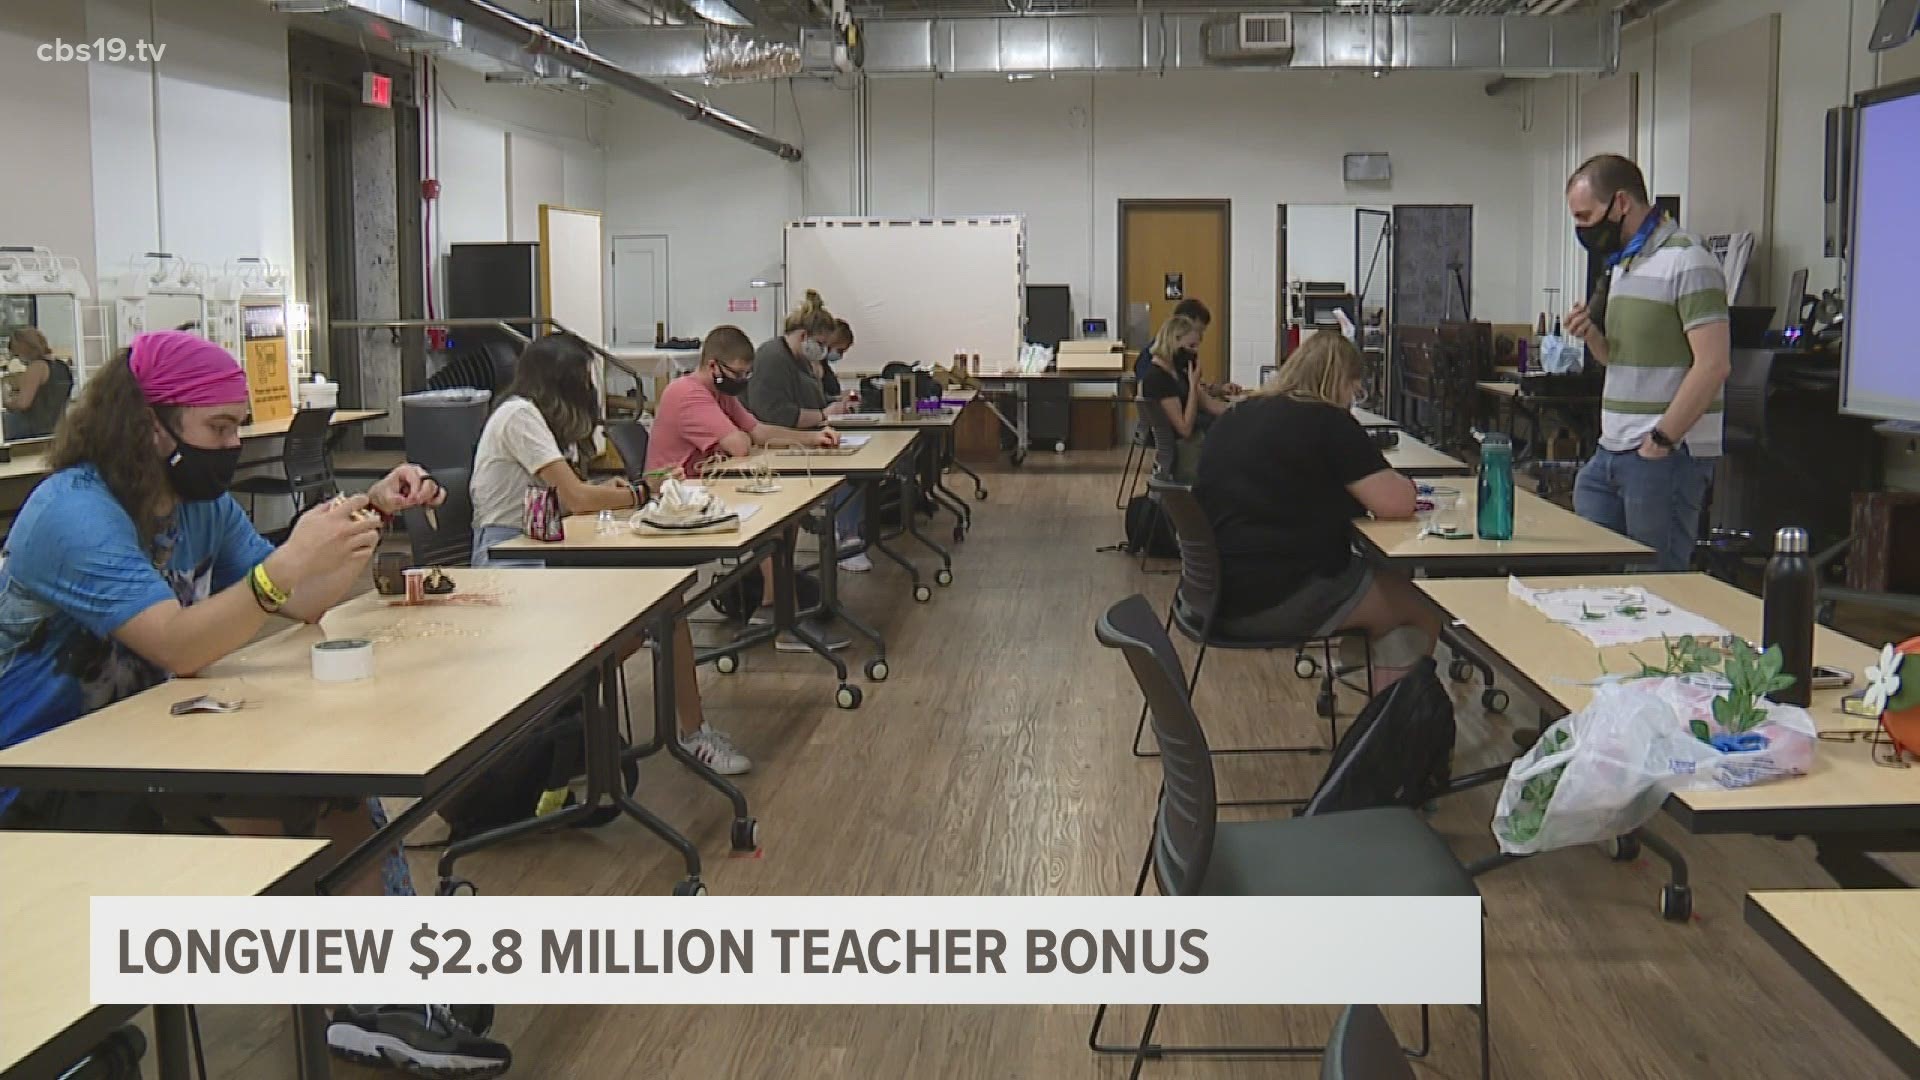 Classroom teachers are projected to earn
more than $100,000 for the 2020-21 school year.